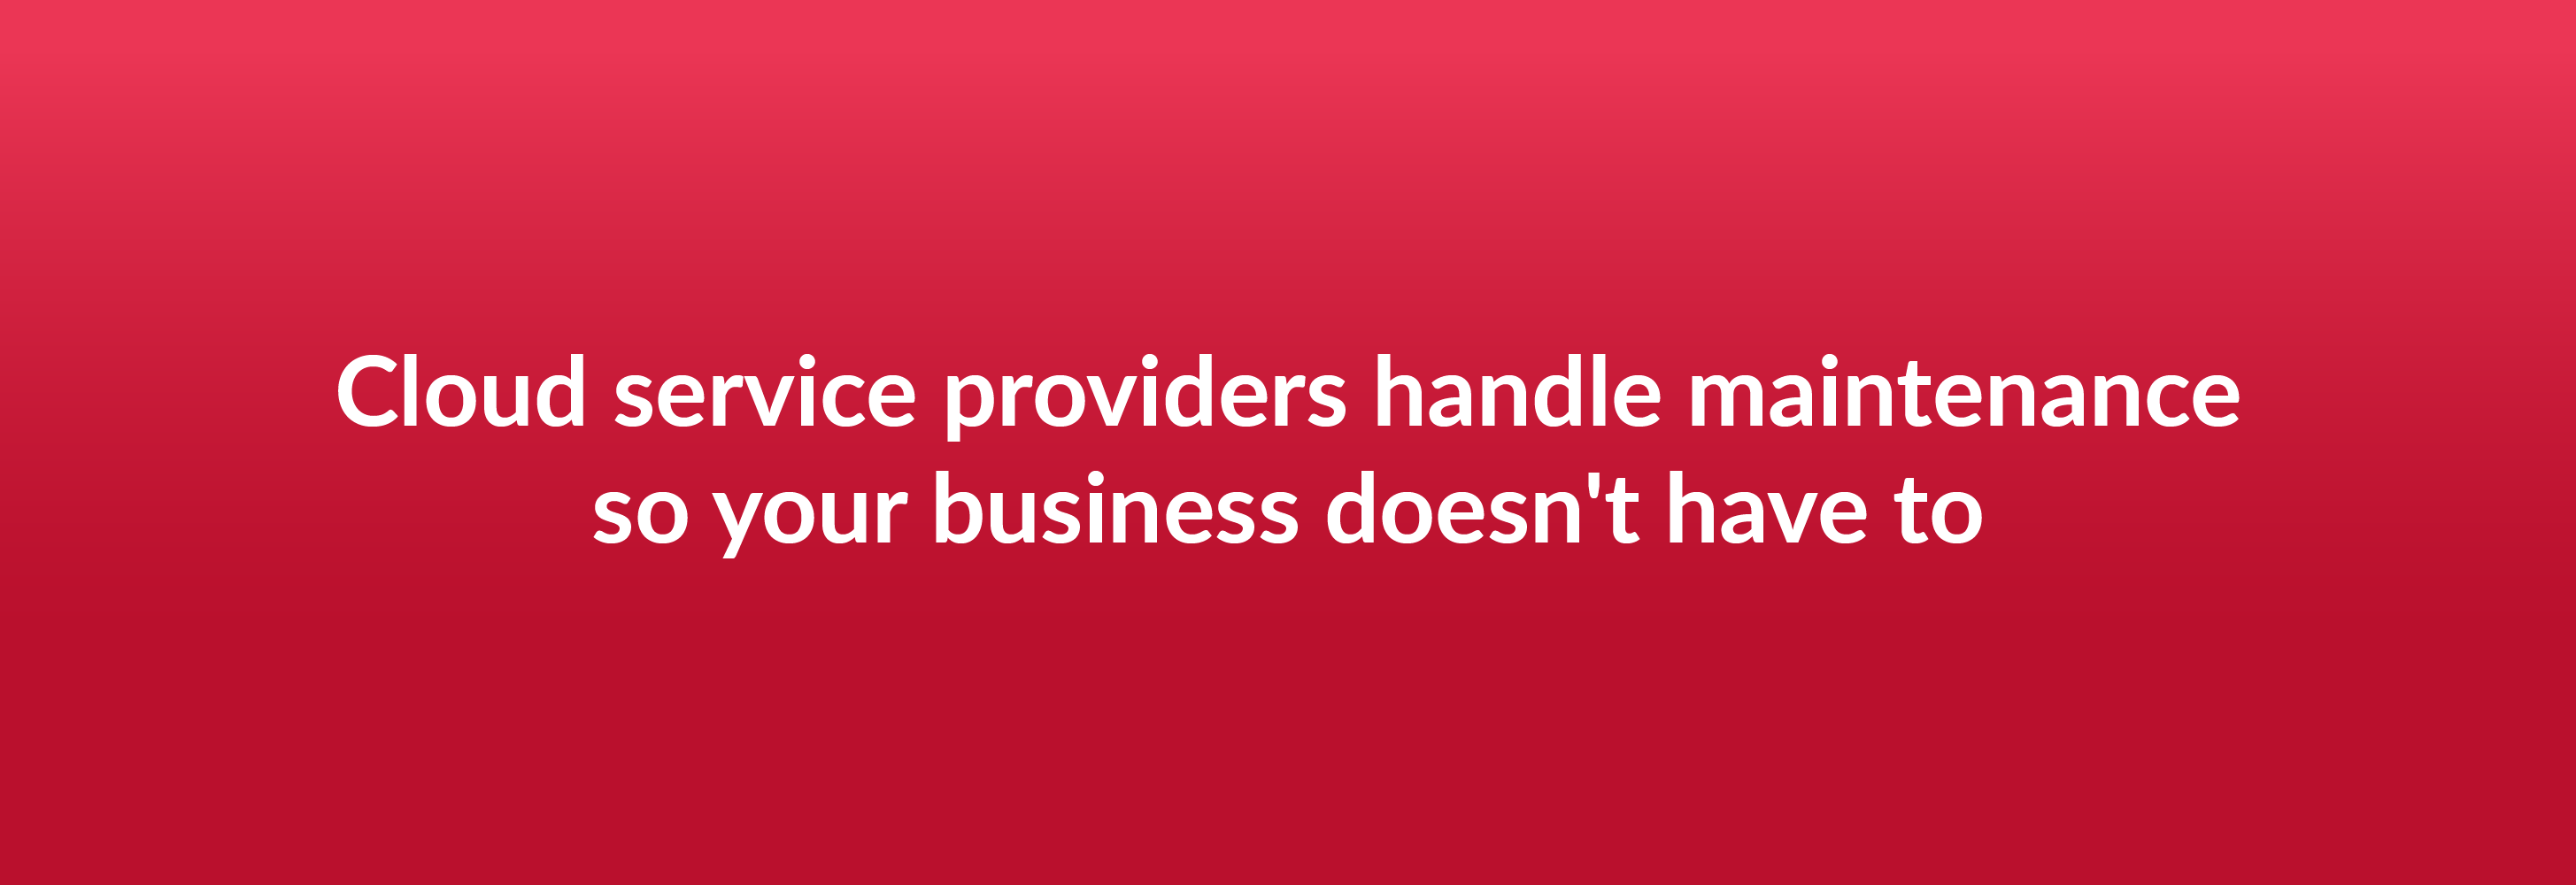 Cloud service providers handle maintenance so your business doesn't have to